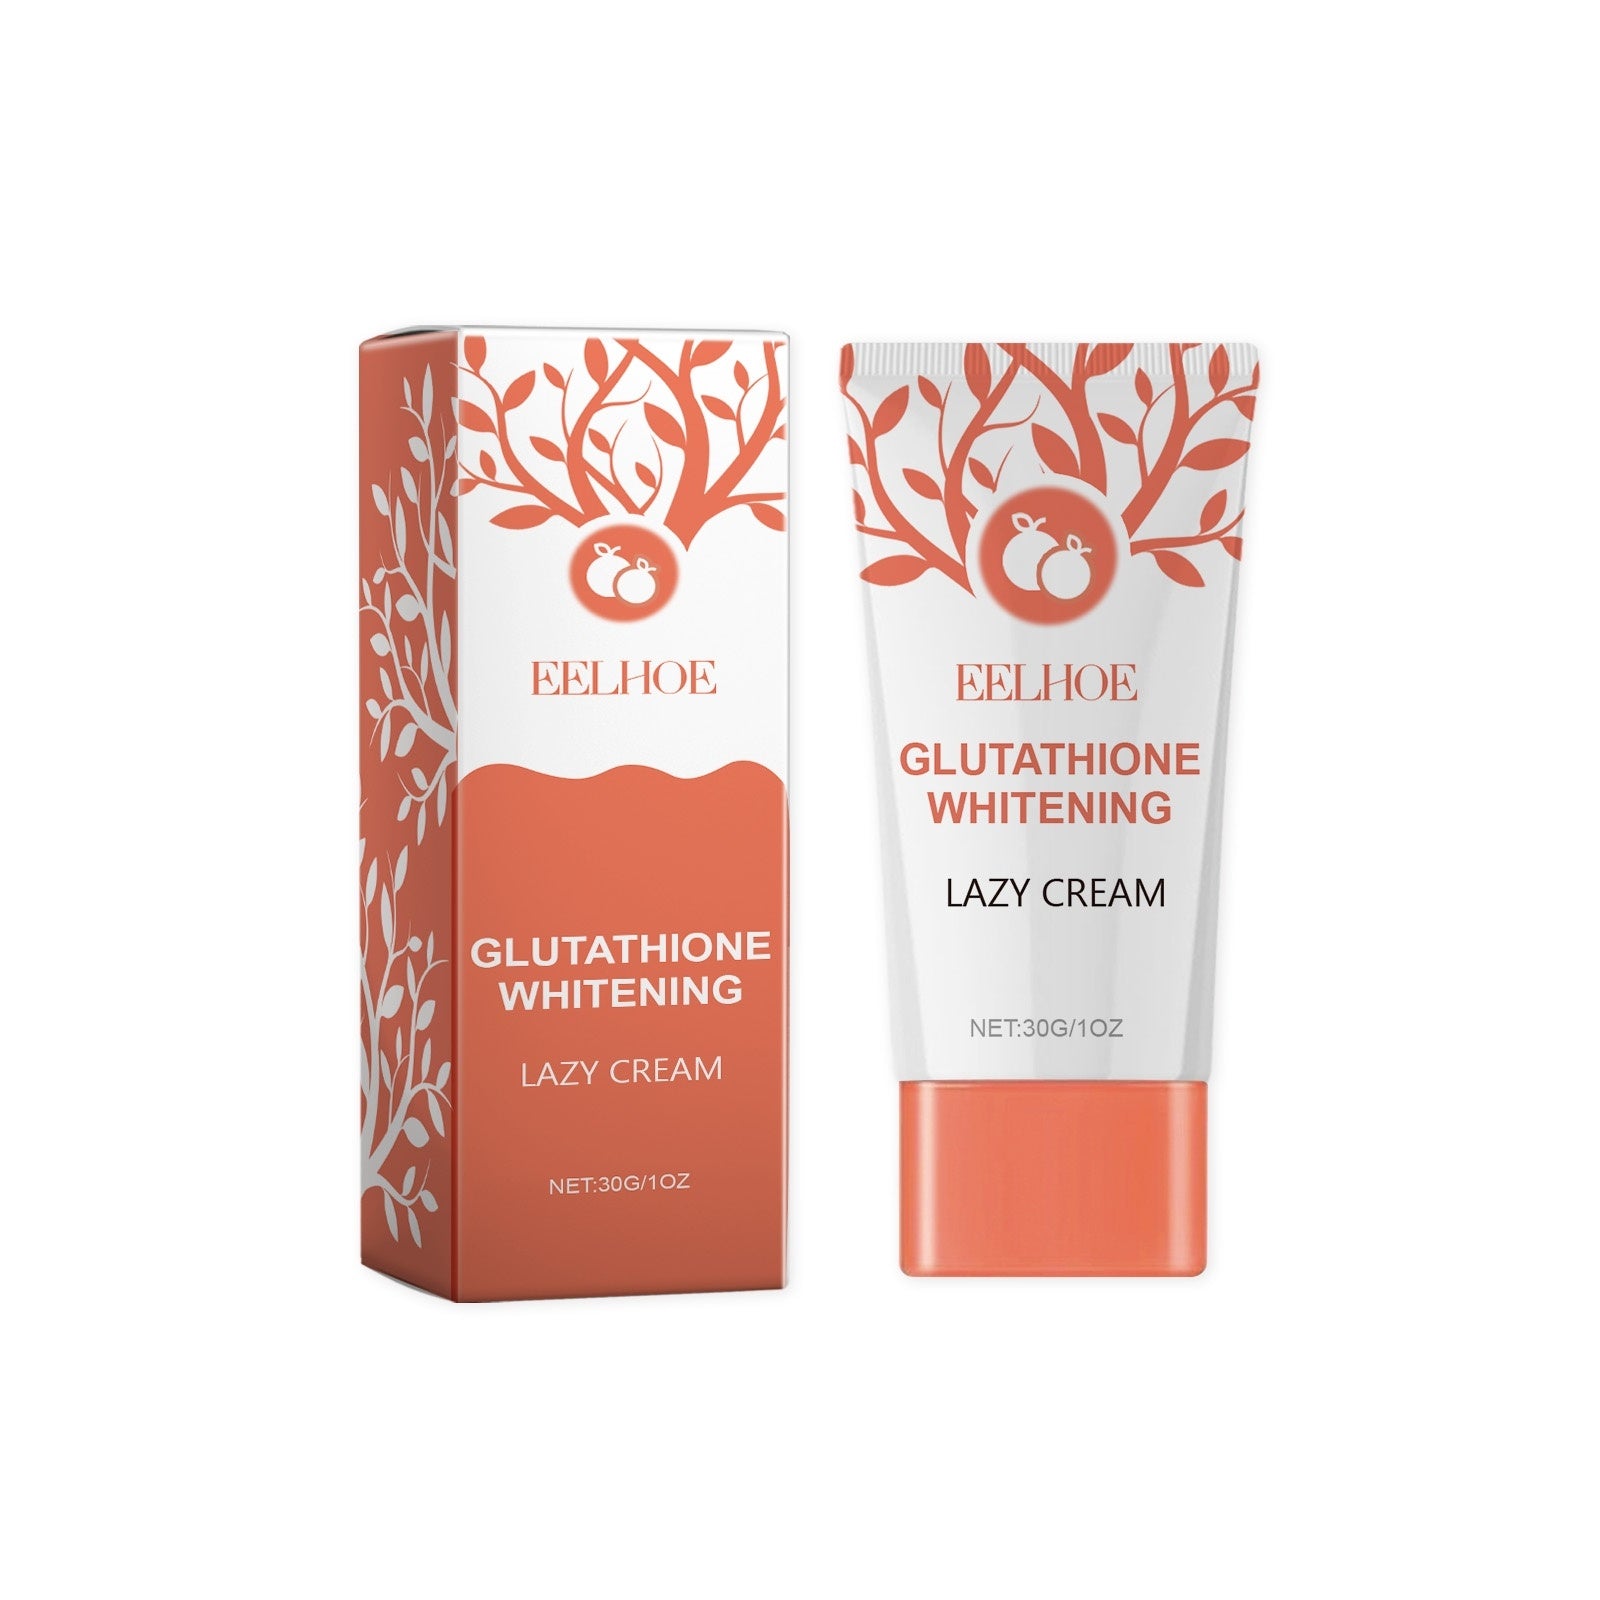 Firming Whitening Face Cream